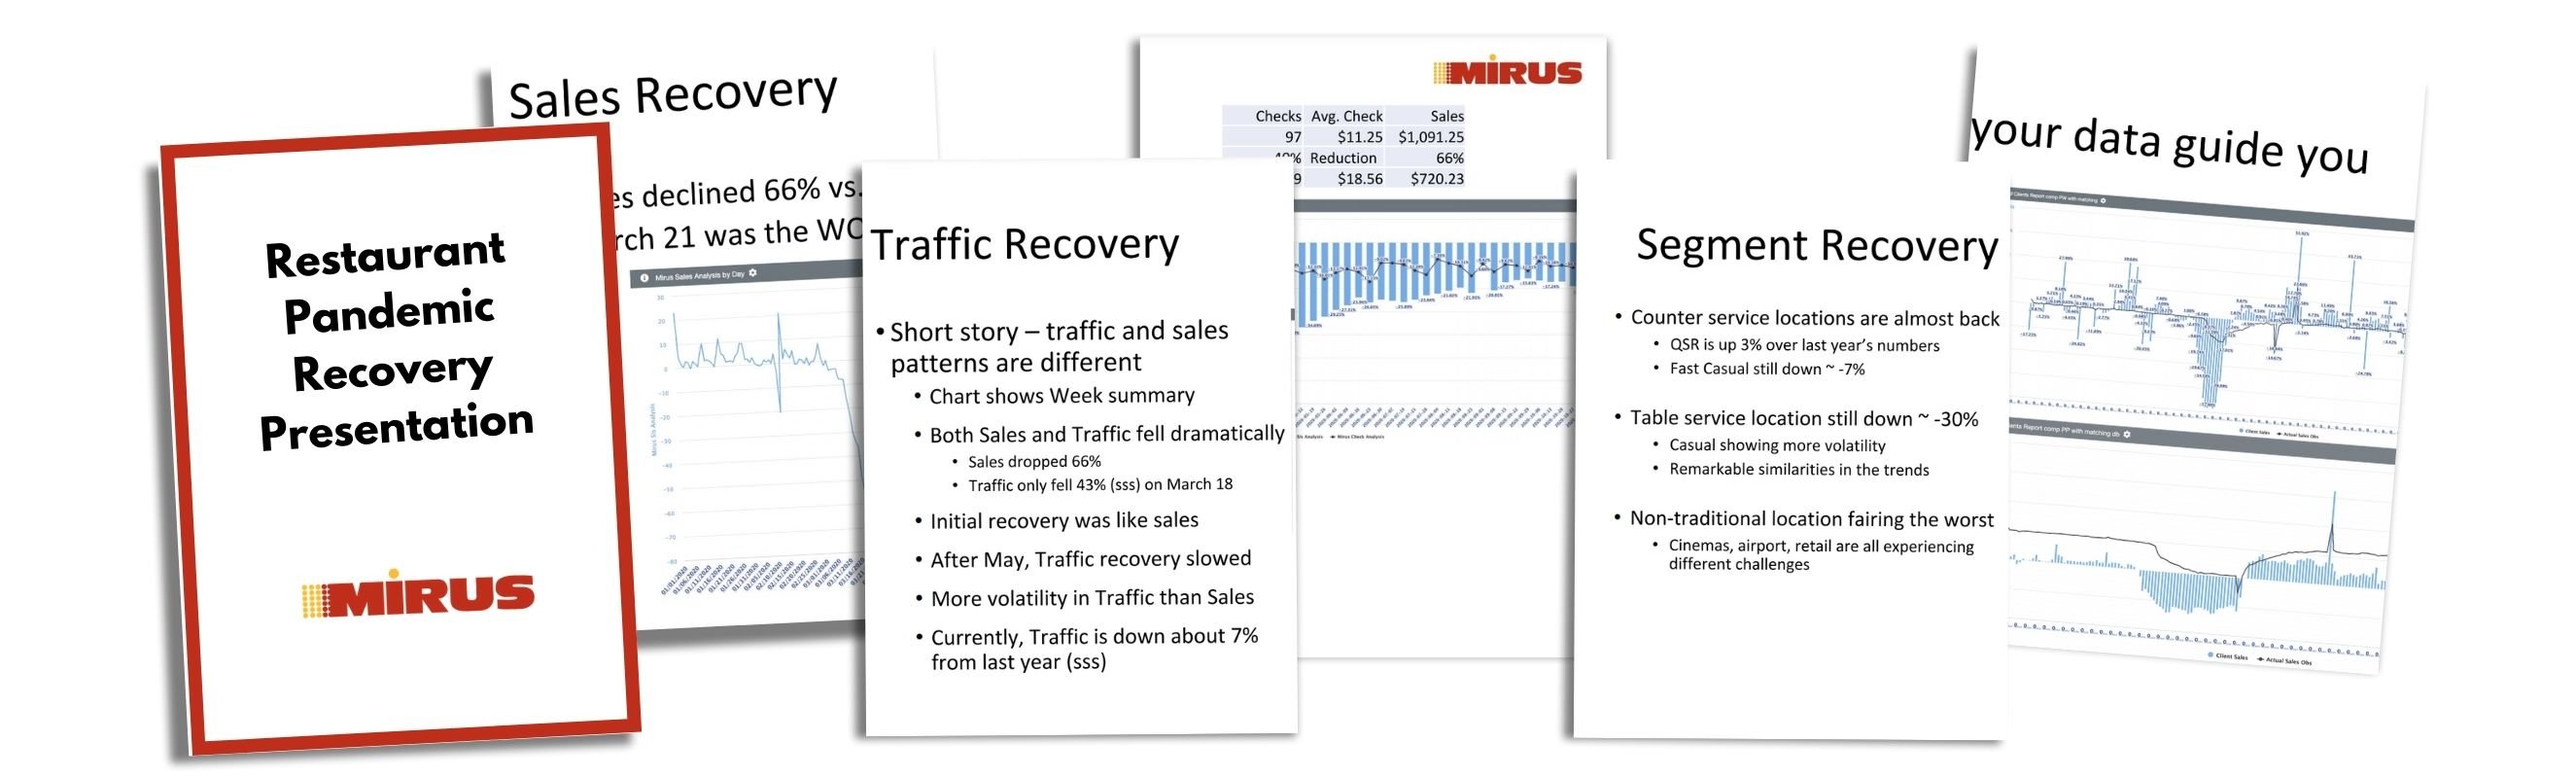 Restaurant Pandemic Recovery Presentation by Mirus